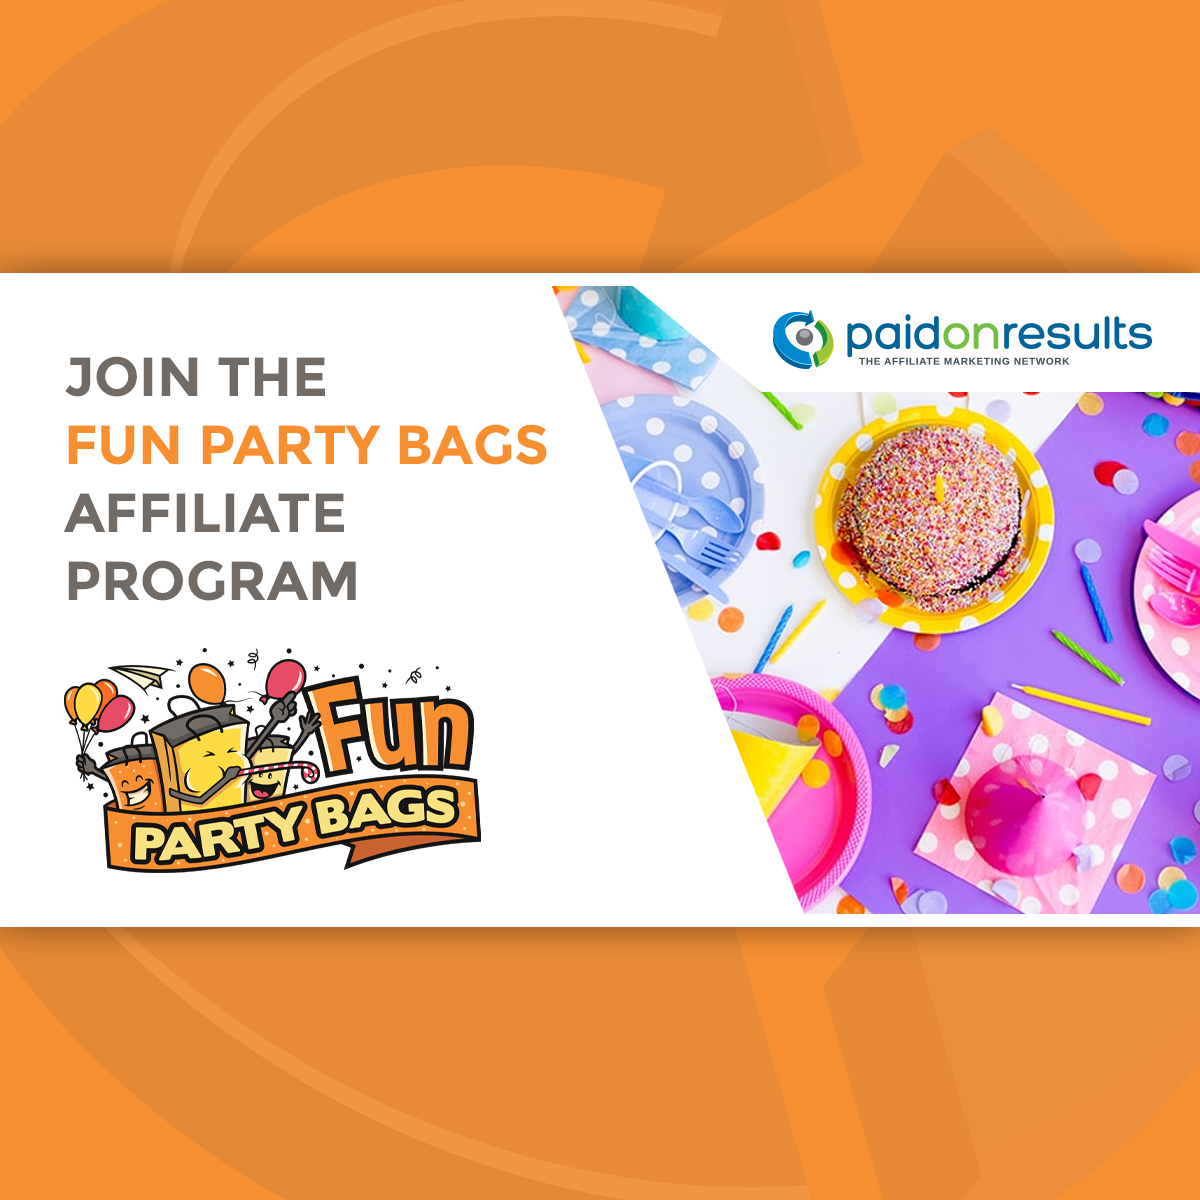 Fun Party Bags - Affiliate Marketing Program by Paid On Results